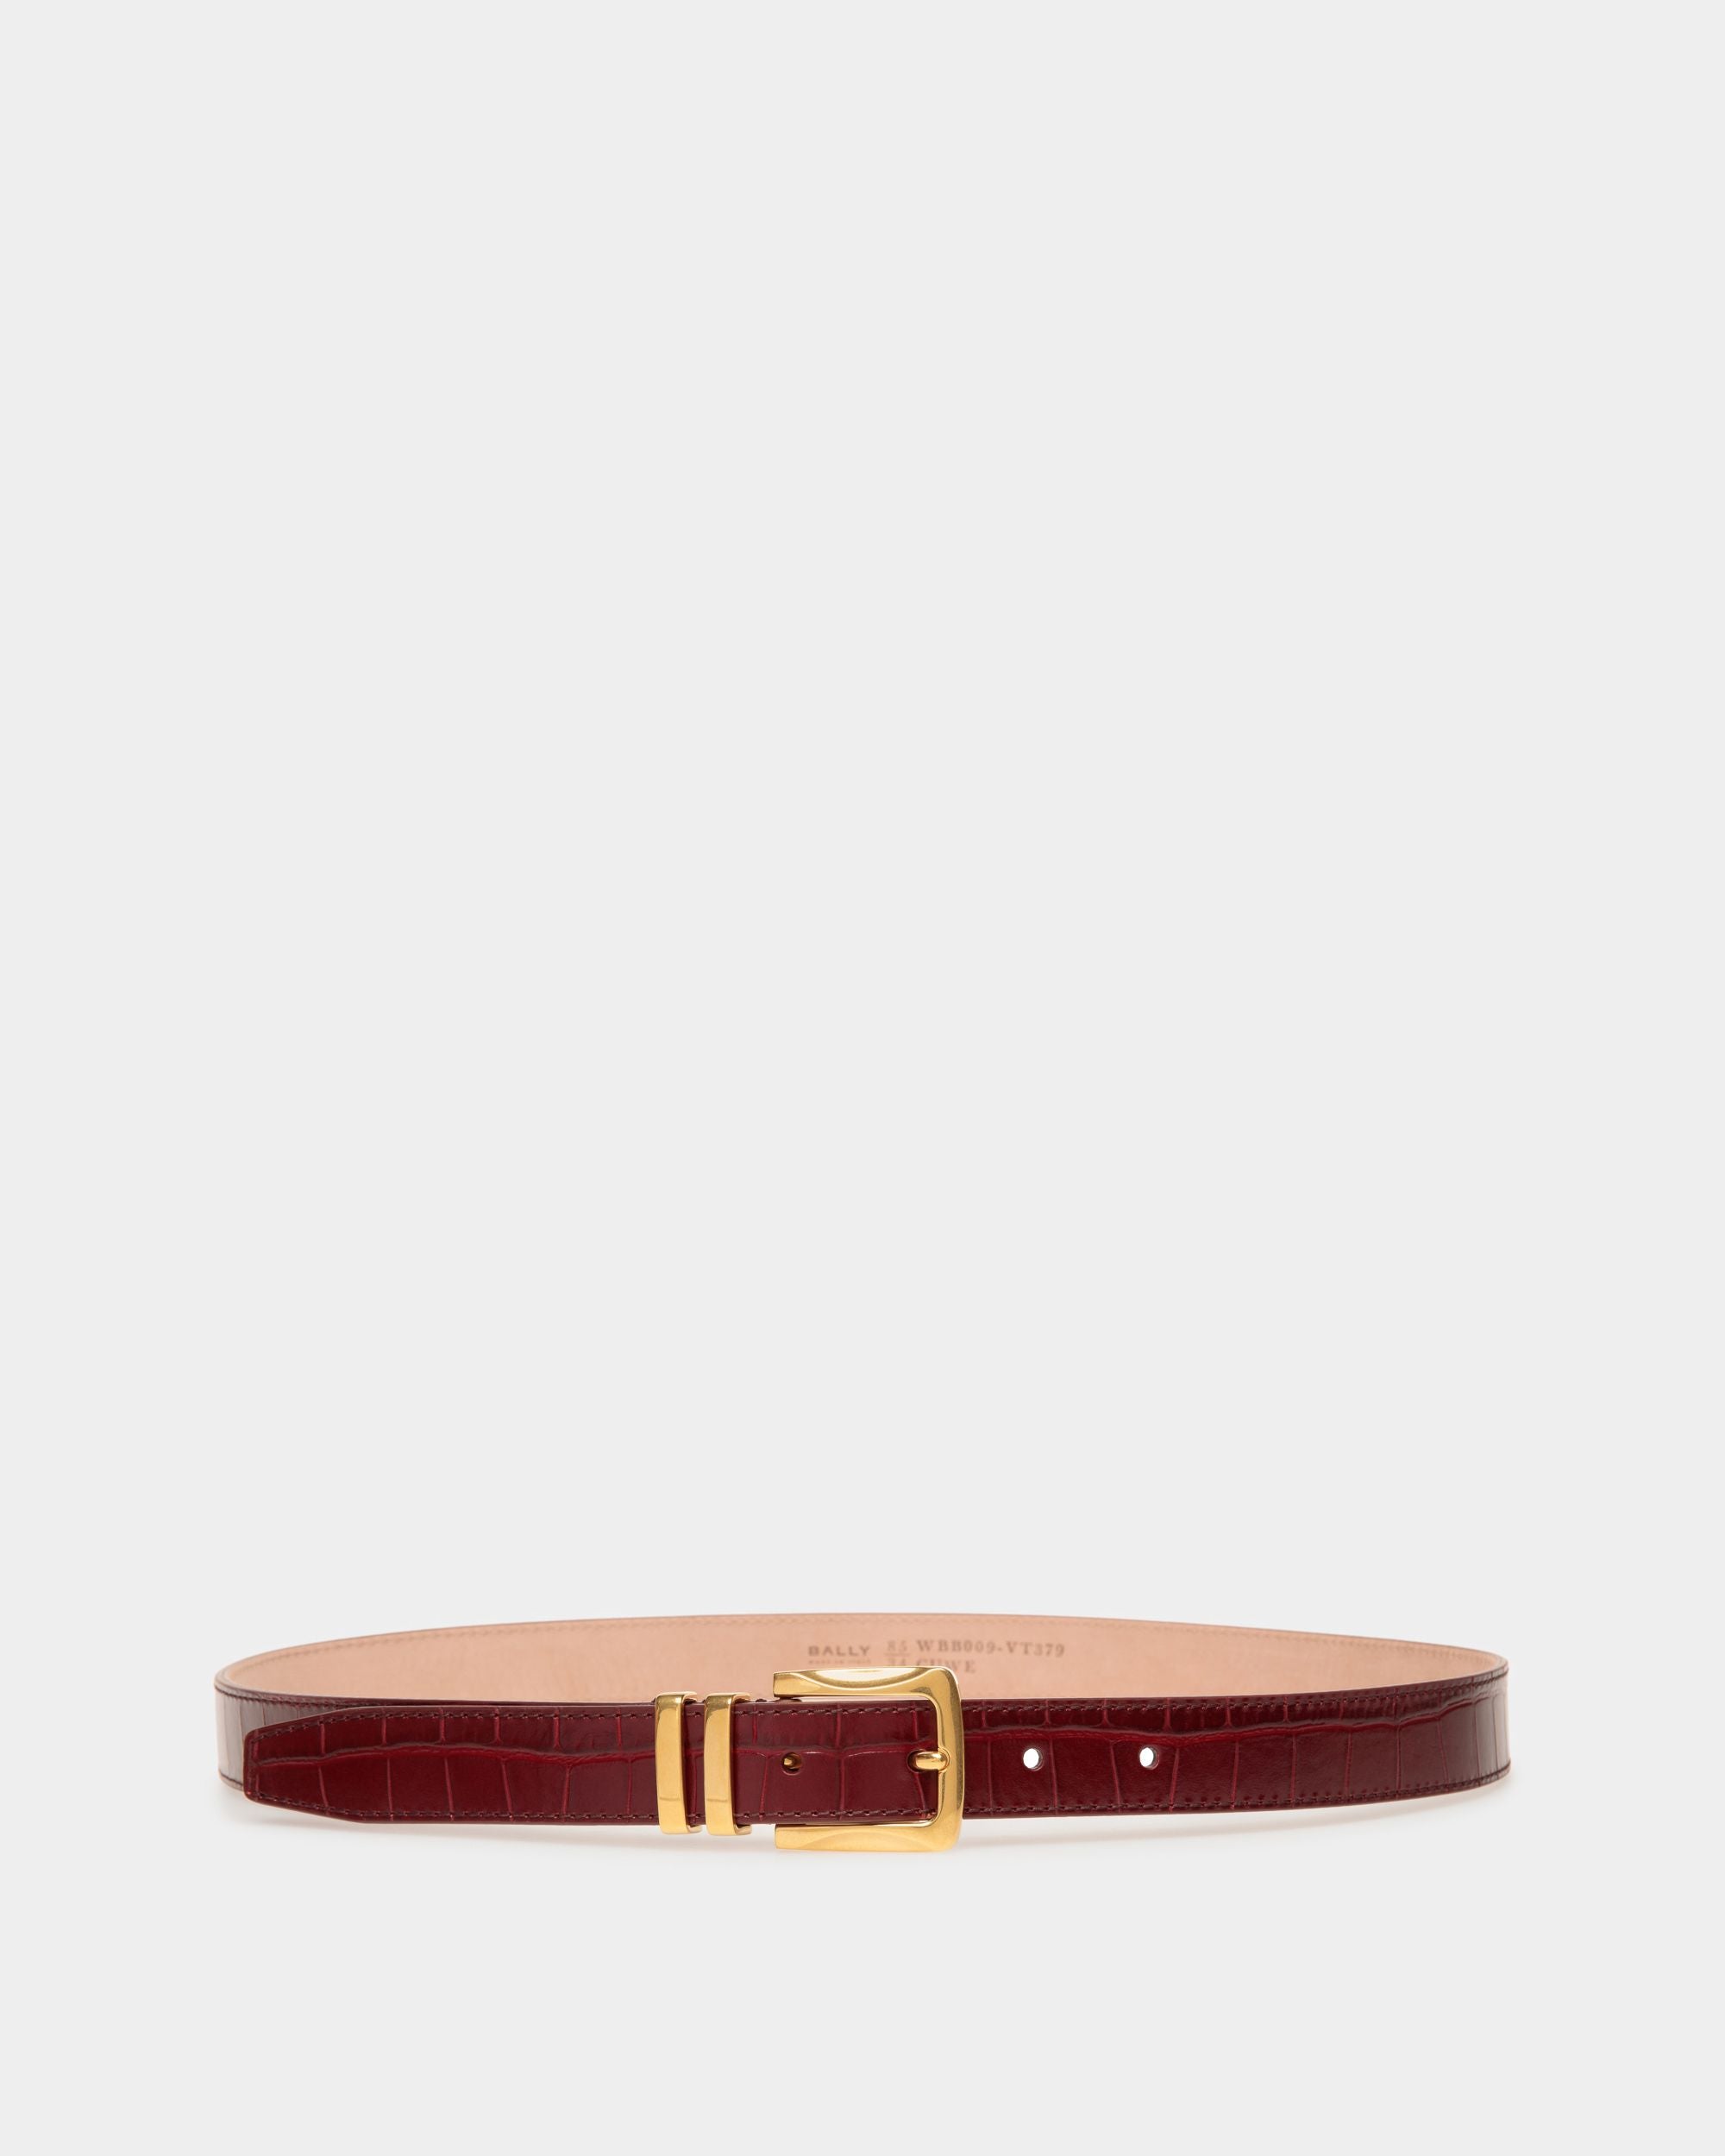 Curved | Women's Fixed Belt | Burgundy Leather | Bally | Still Life Front